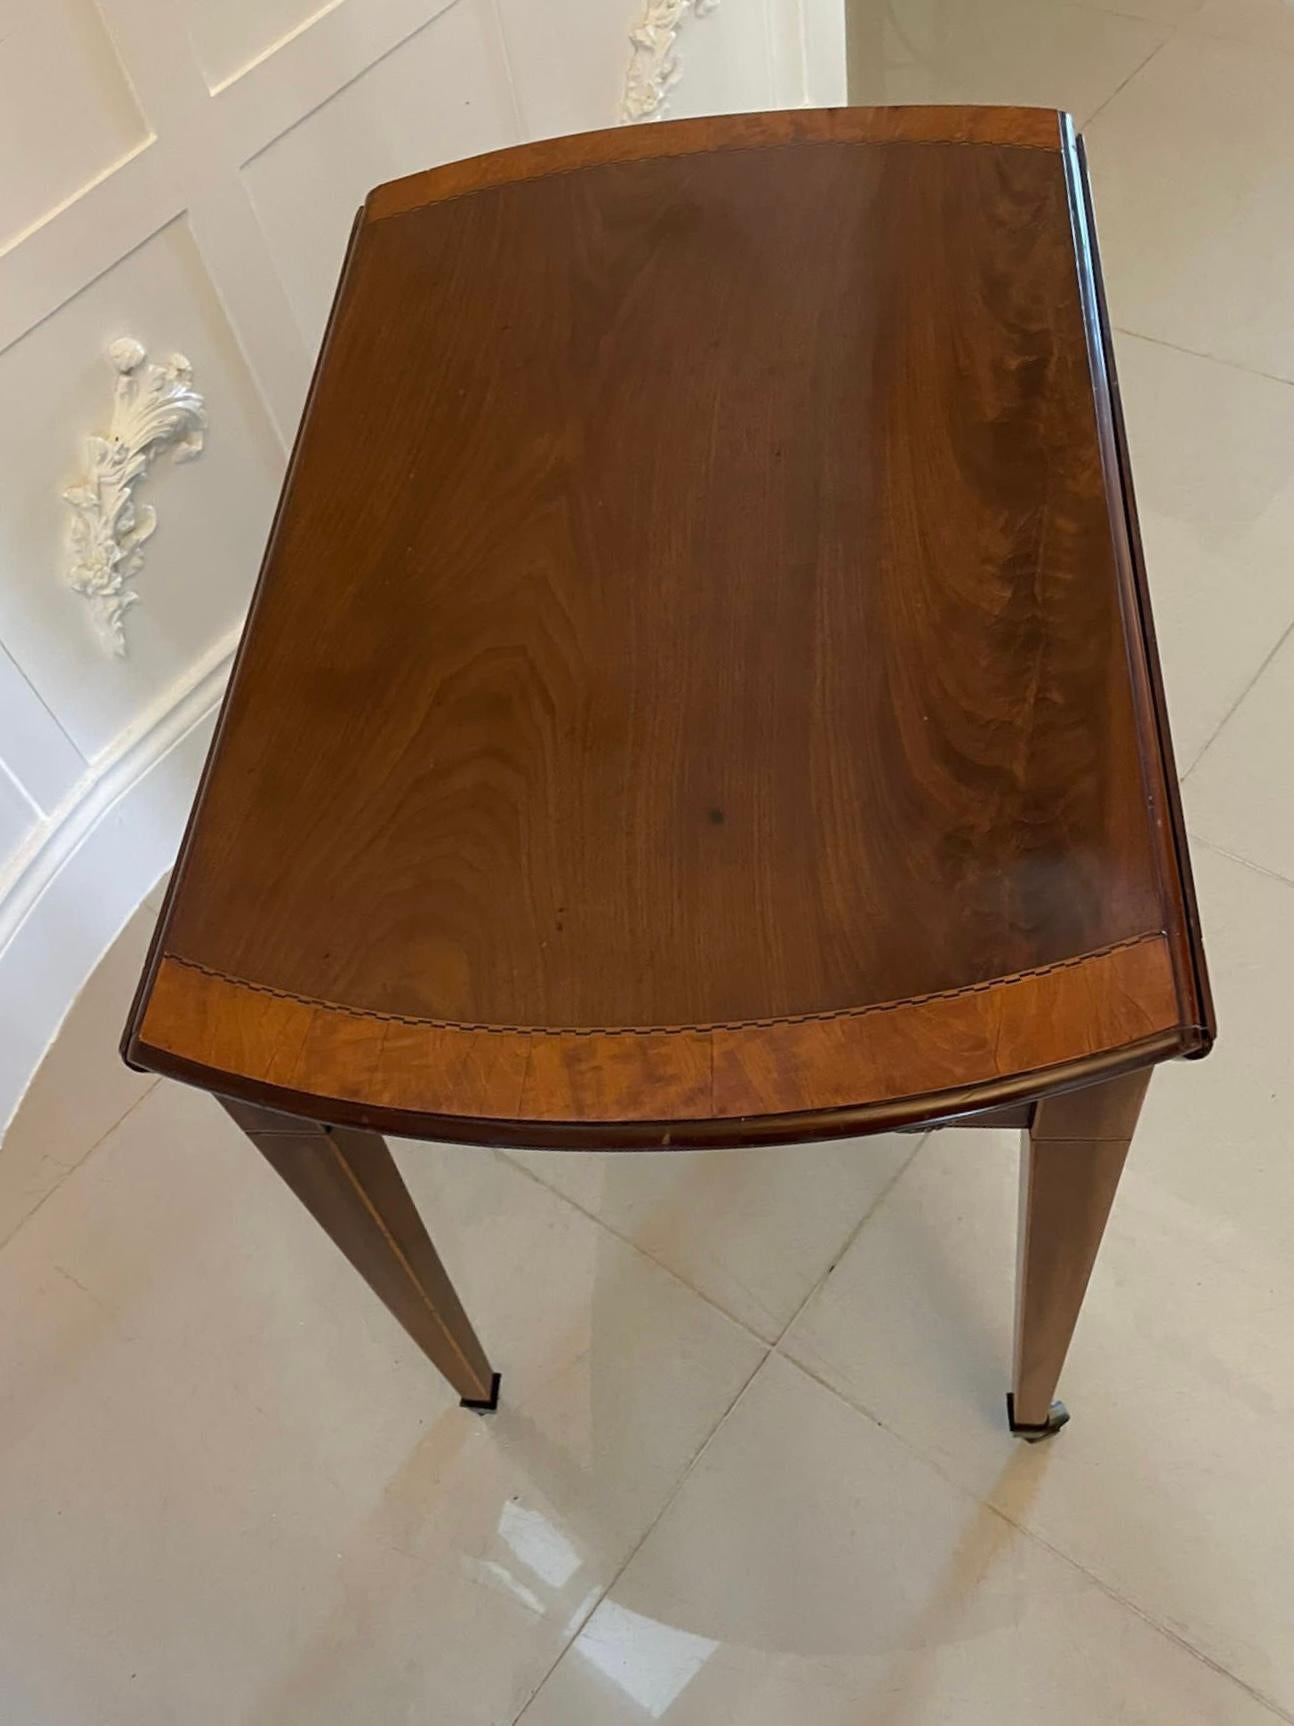 Other Fine Quality Antique Sheraton Period Inlaid Mahogany Pembroke Table For Sale